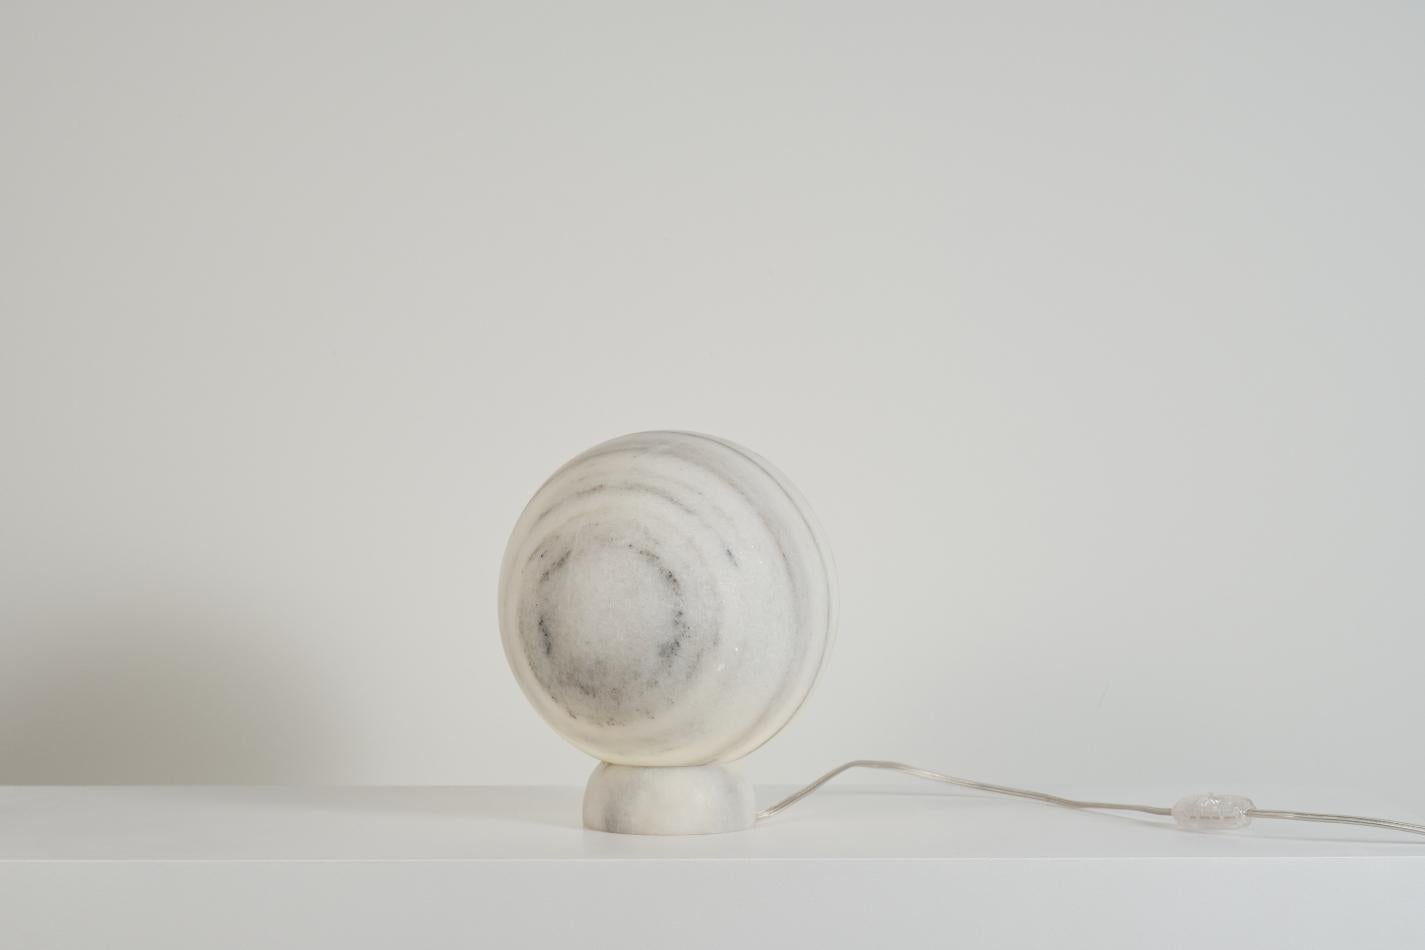 Carved out from a single piece of marble, handpicked and handcrafted, the light belongs to a unique collection that resembles celestial bodies.
A portion from a stone landscape, removed from its original context, lacks the authenticity of